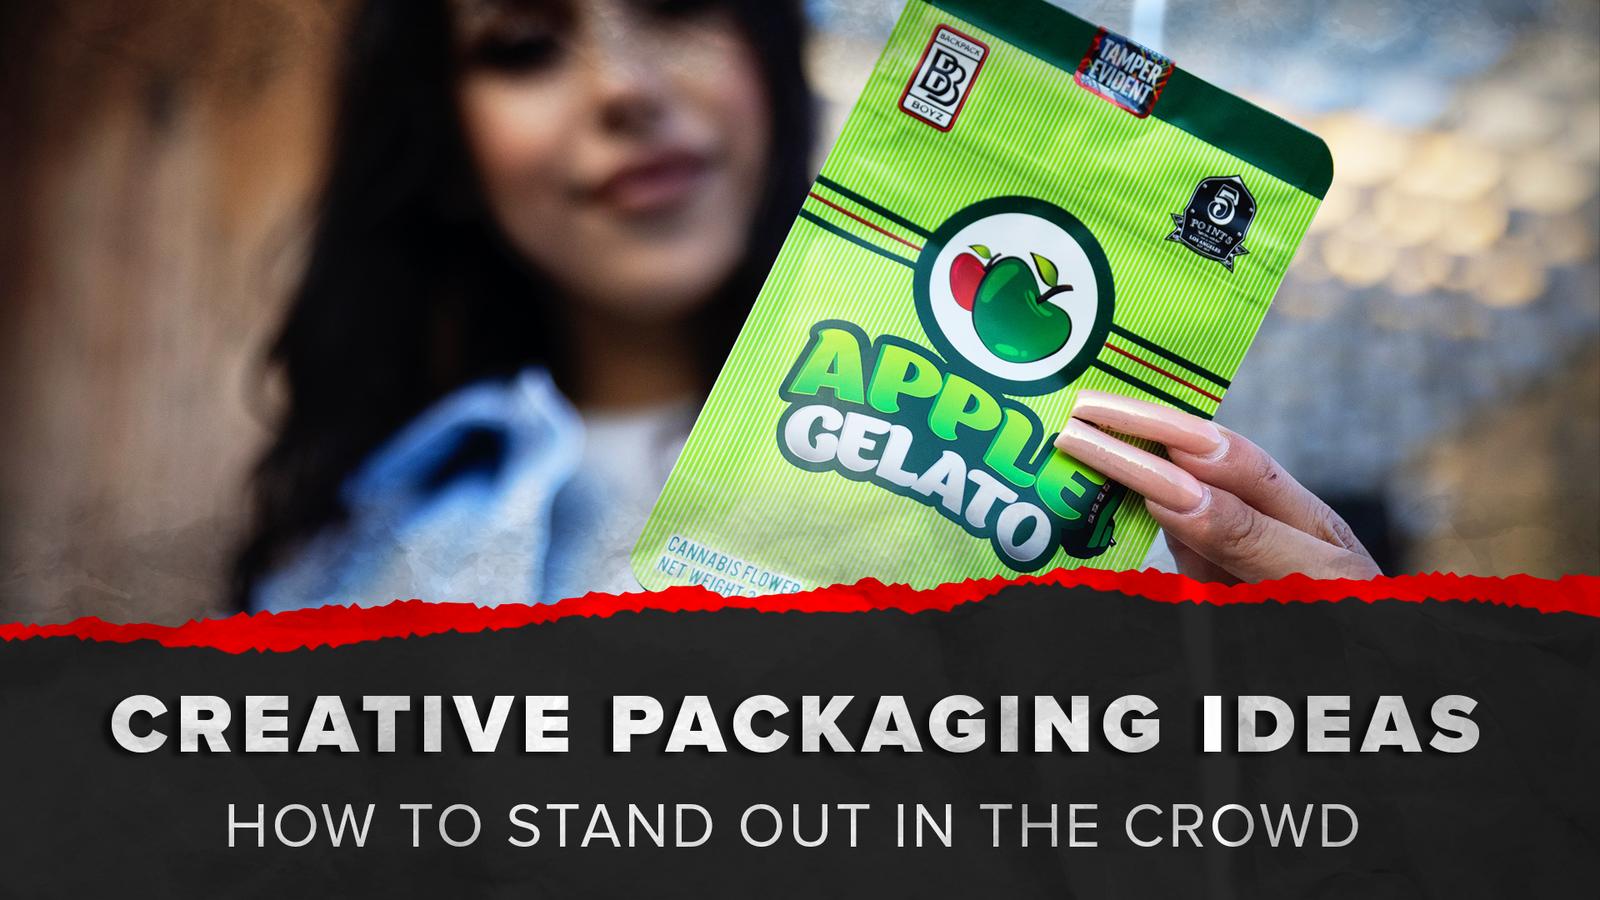 Cannabis Packaging: Creative Ideas To Stand Out!